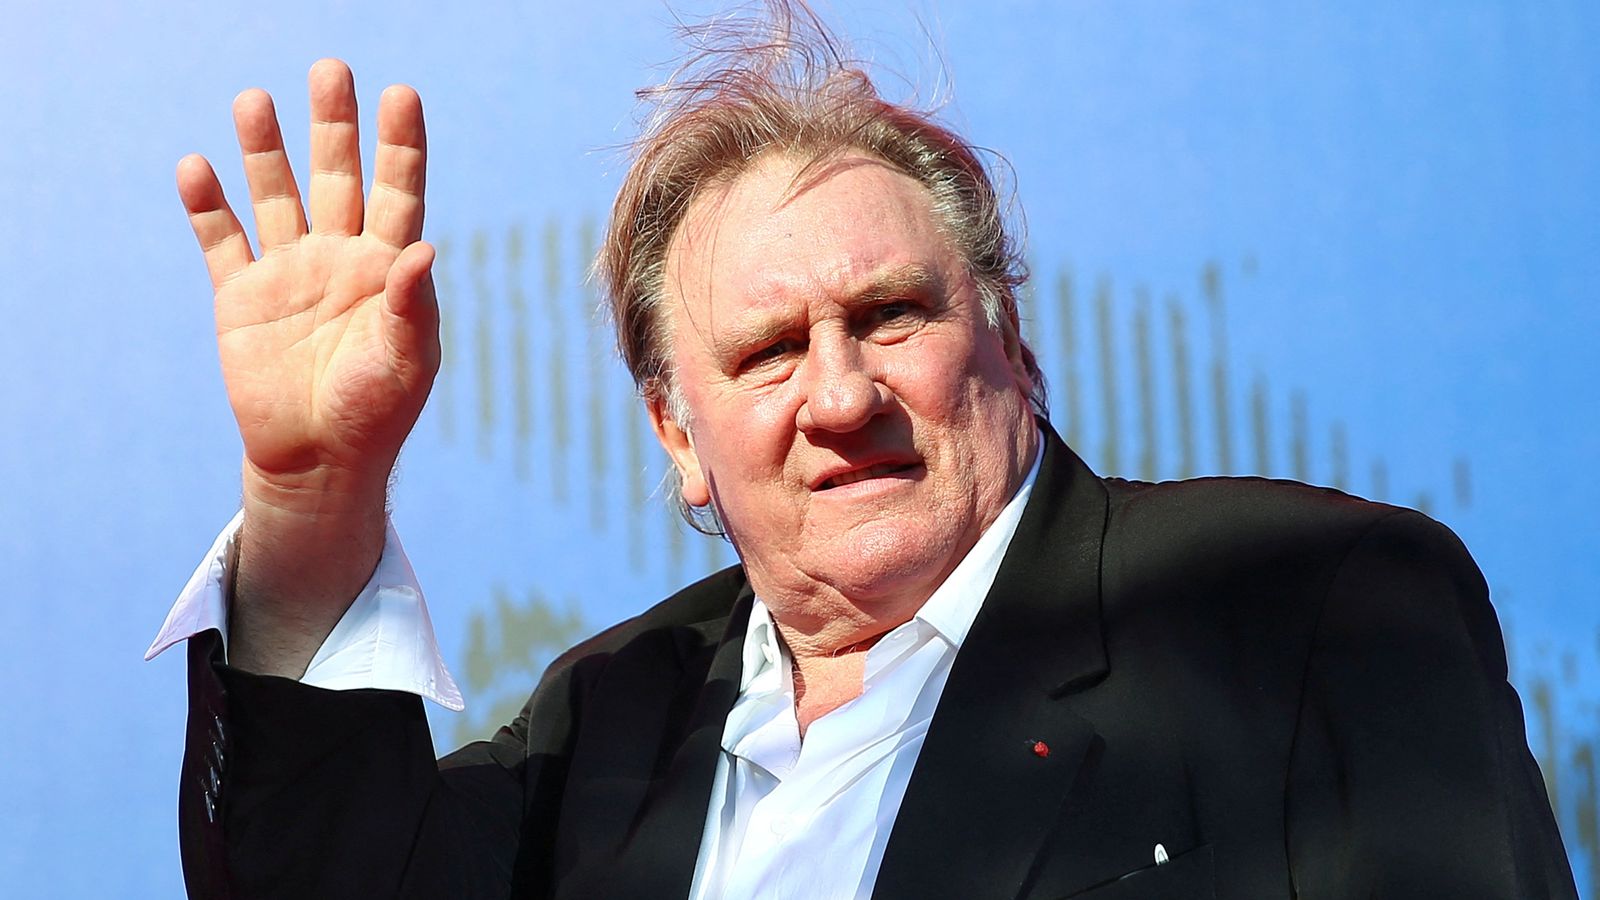 Gerard Depardieu: New sexual assault claim against French actor